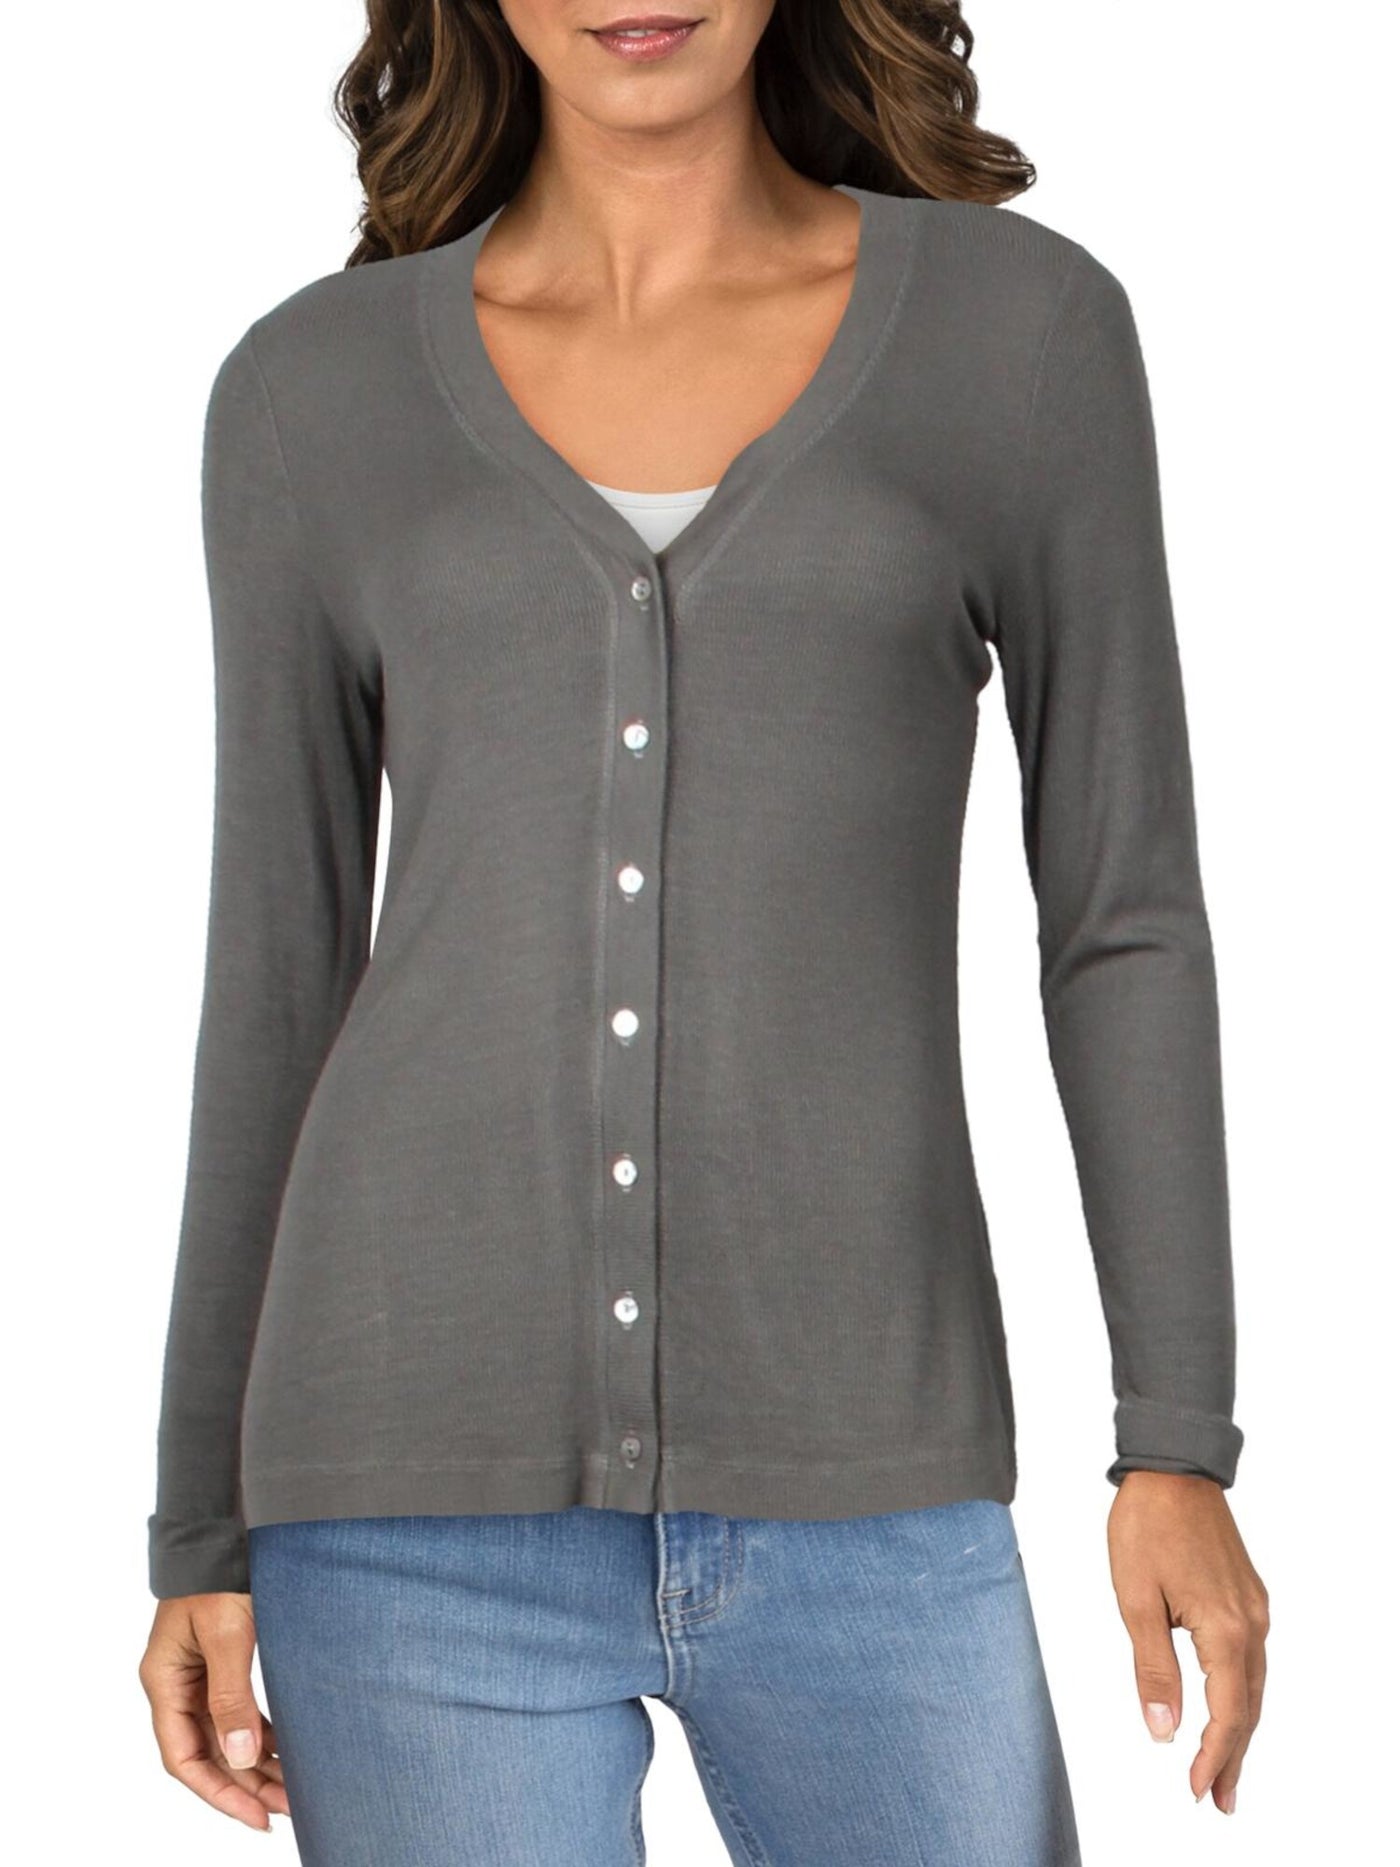 DOLAN Womens Gray Stretch Ribbed Cardigan Long Sleeve V Neck Button Up Sweater S